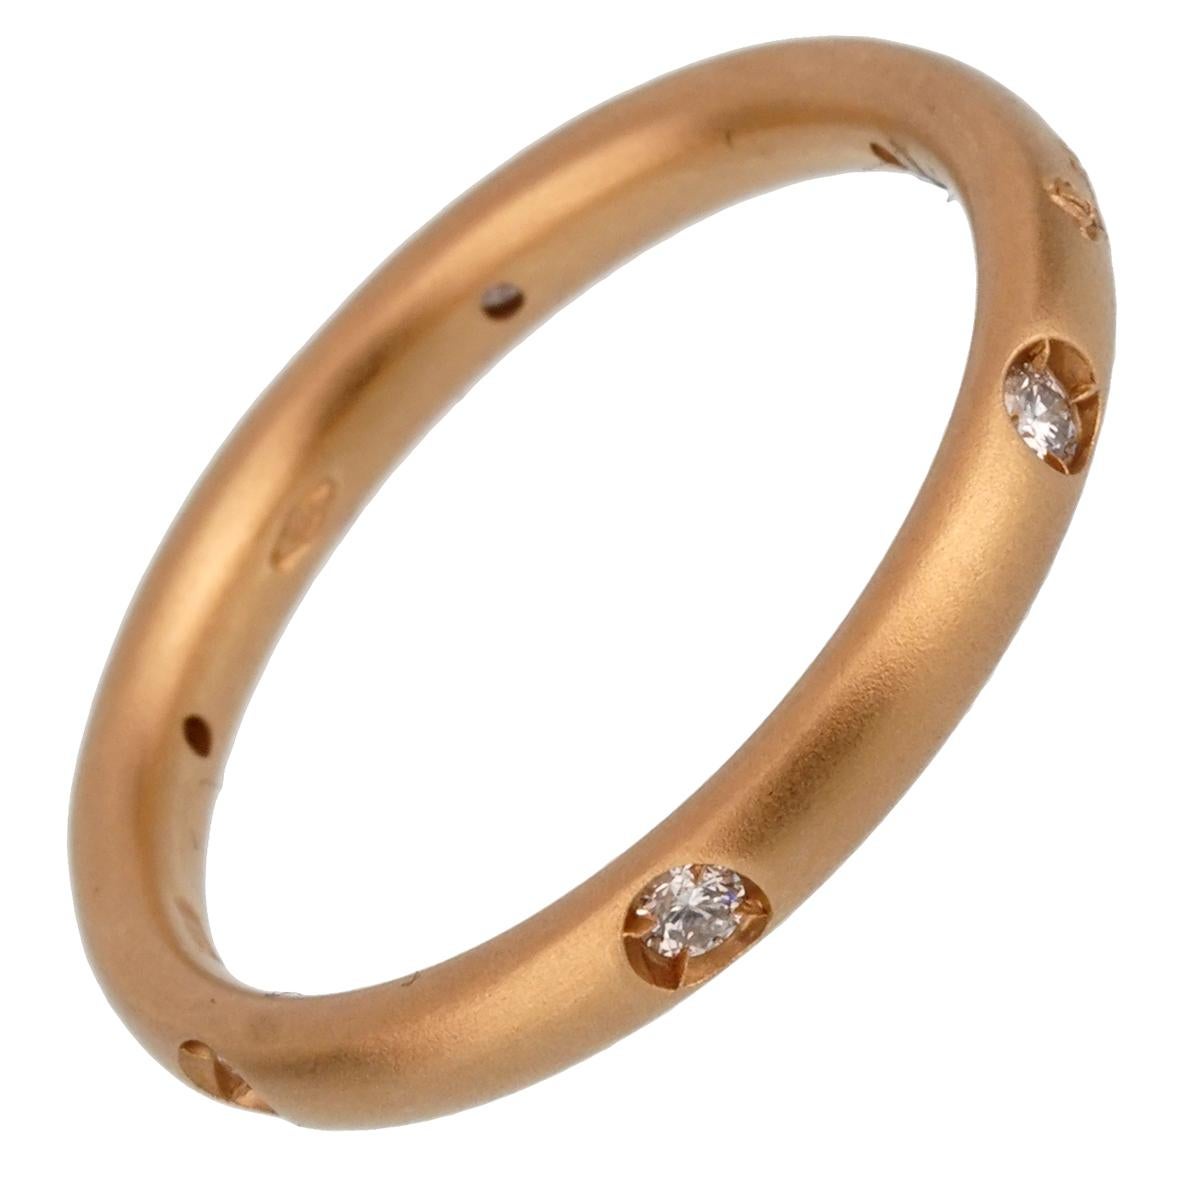 A chic brand new Pomellato diamond ring adorned with round brilliant cut diamonds in 18k rose gold. The ring measures a size 6 1/4

Sku: 2366